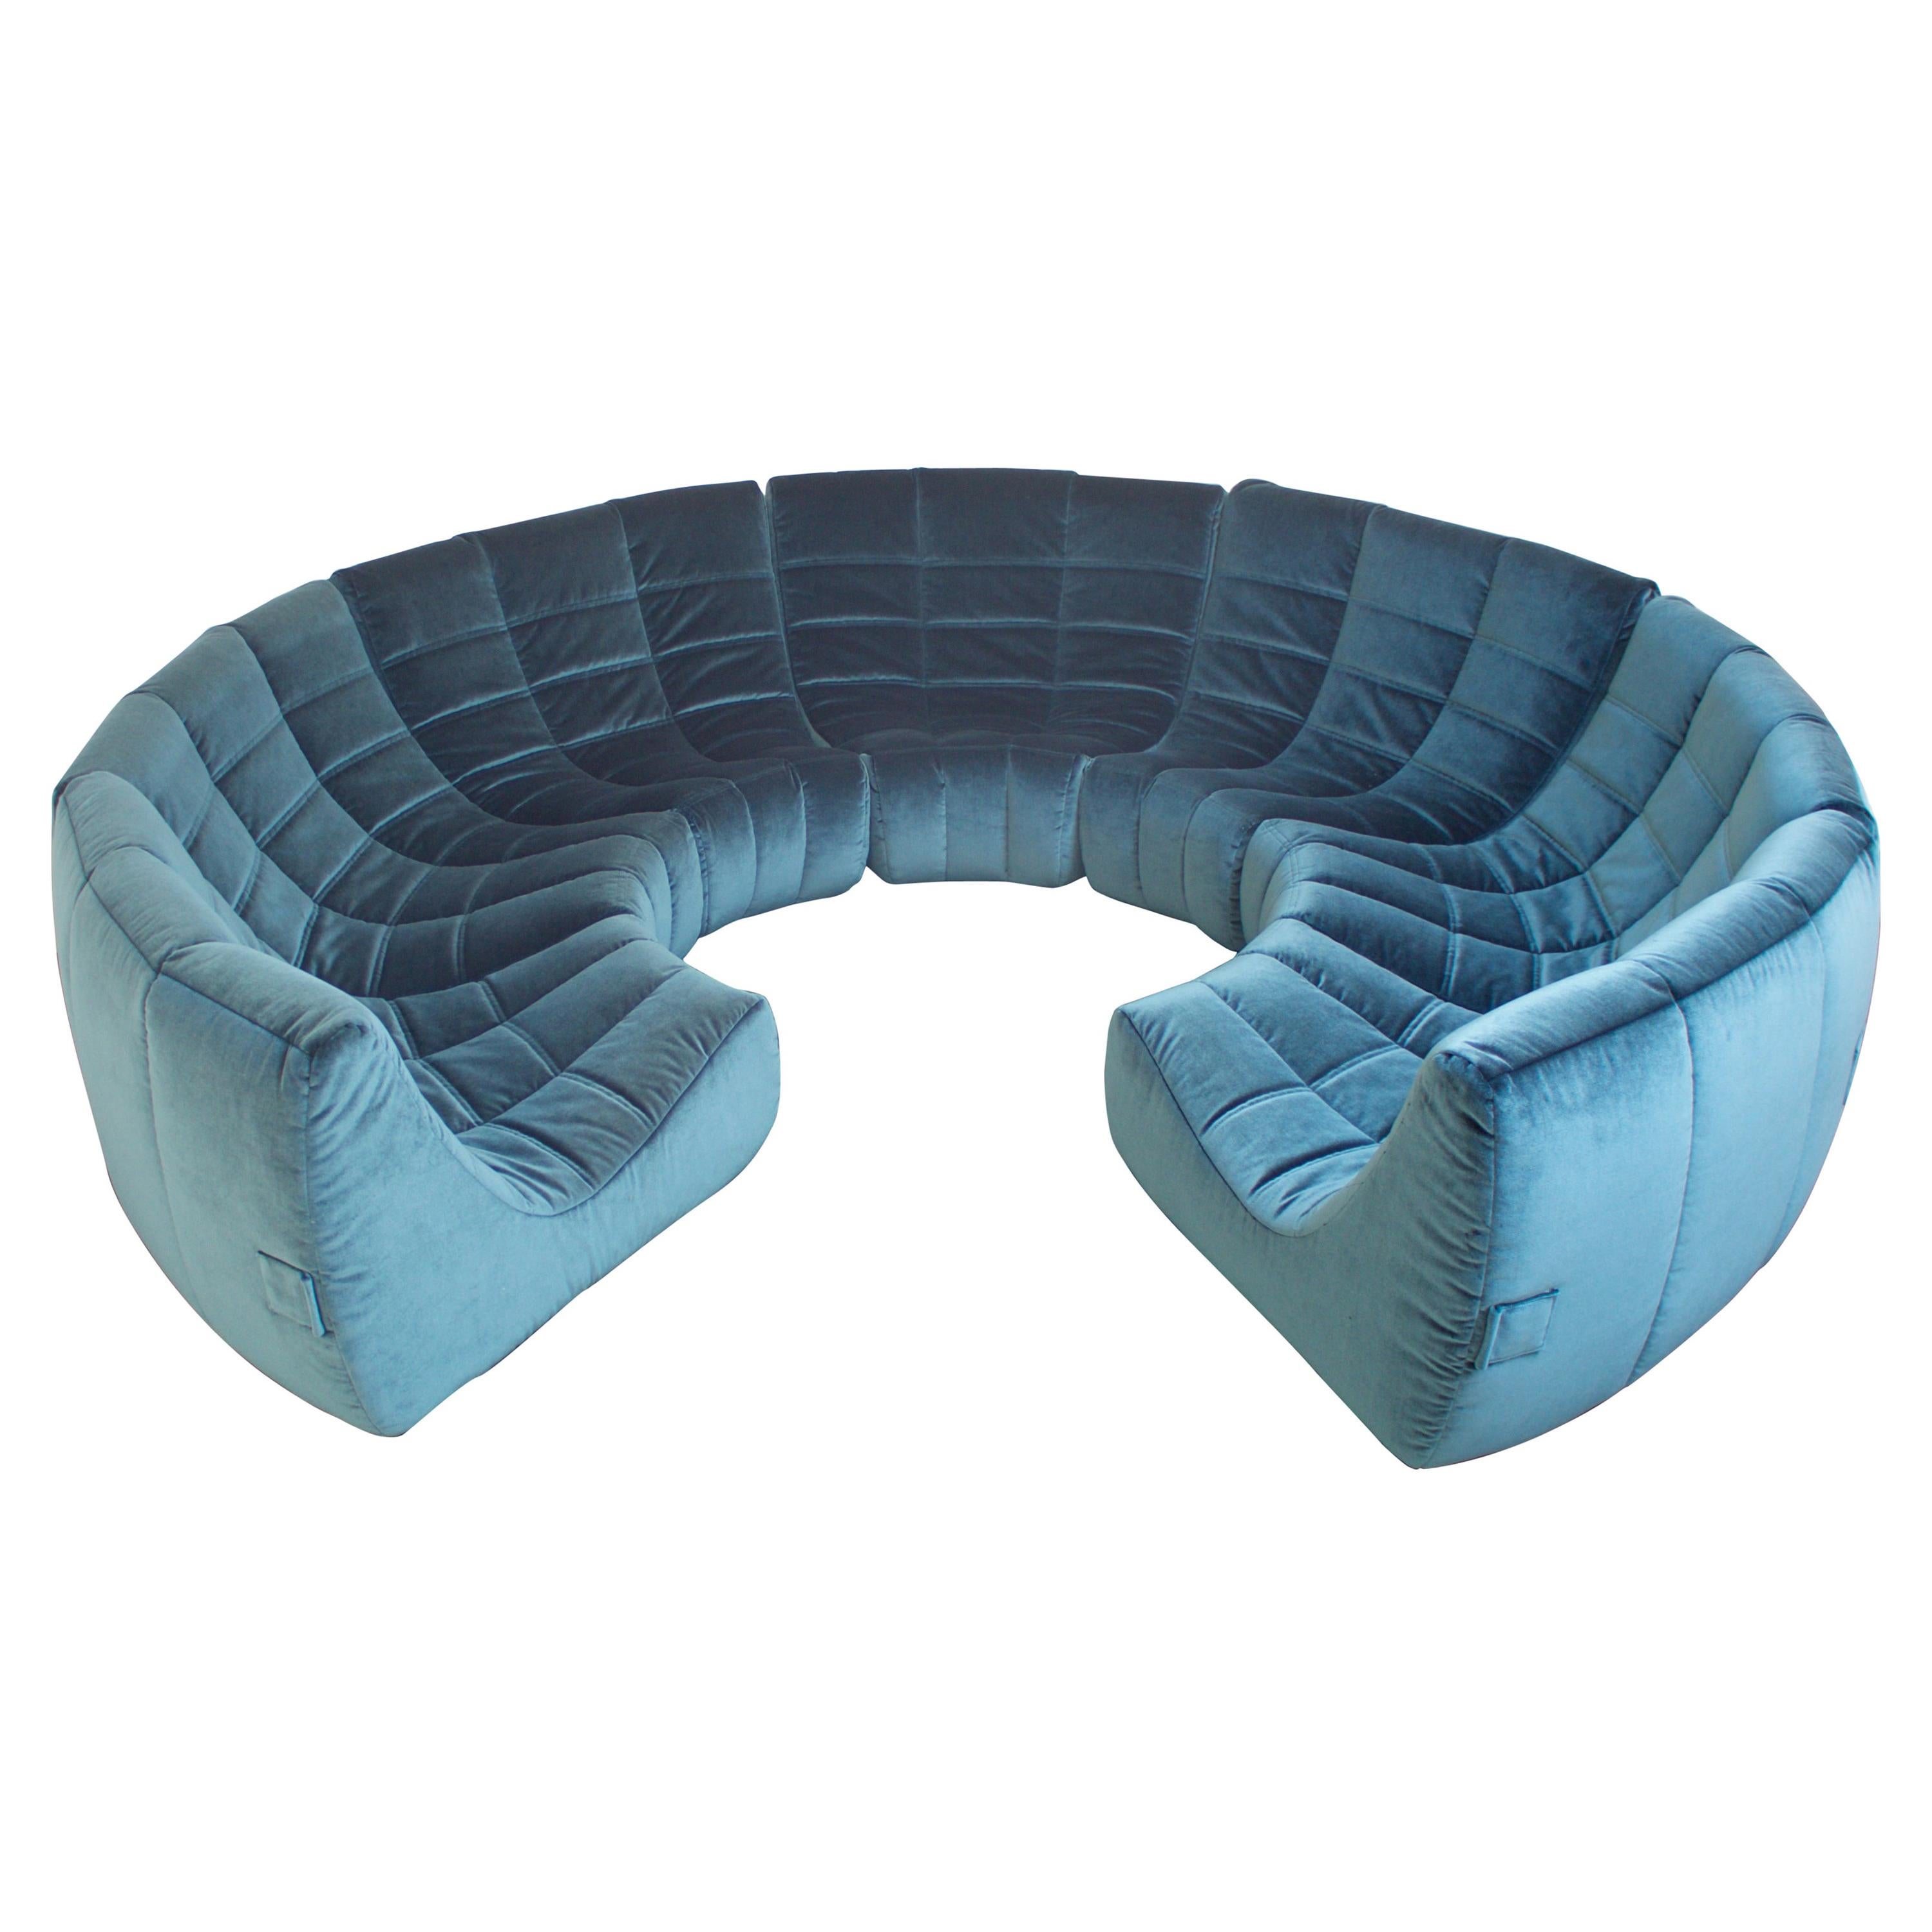 Rare and Exceptional 'Gilda' Circle Sofa in Velvet by Michel Ducaroy, 1972 For Sale